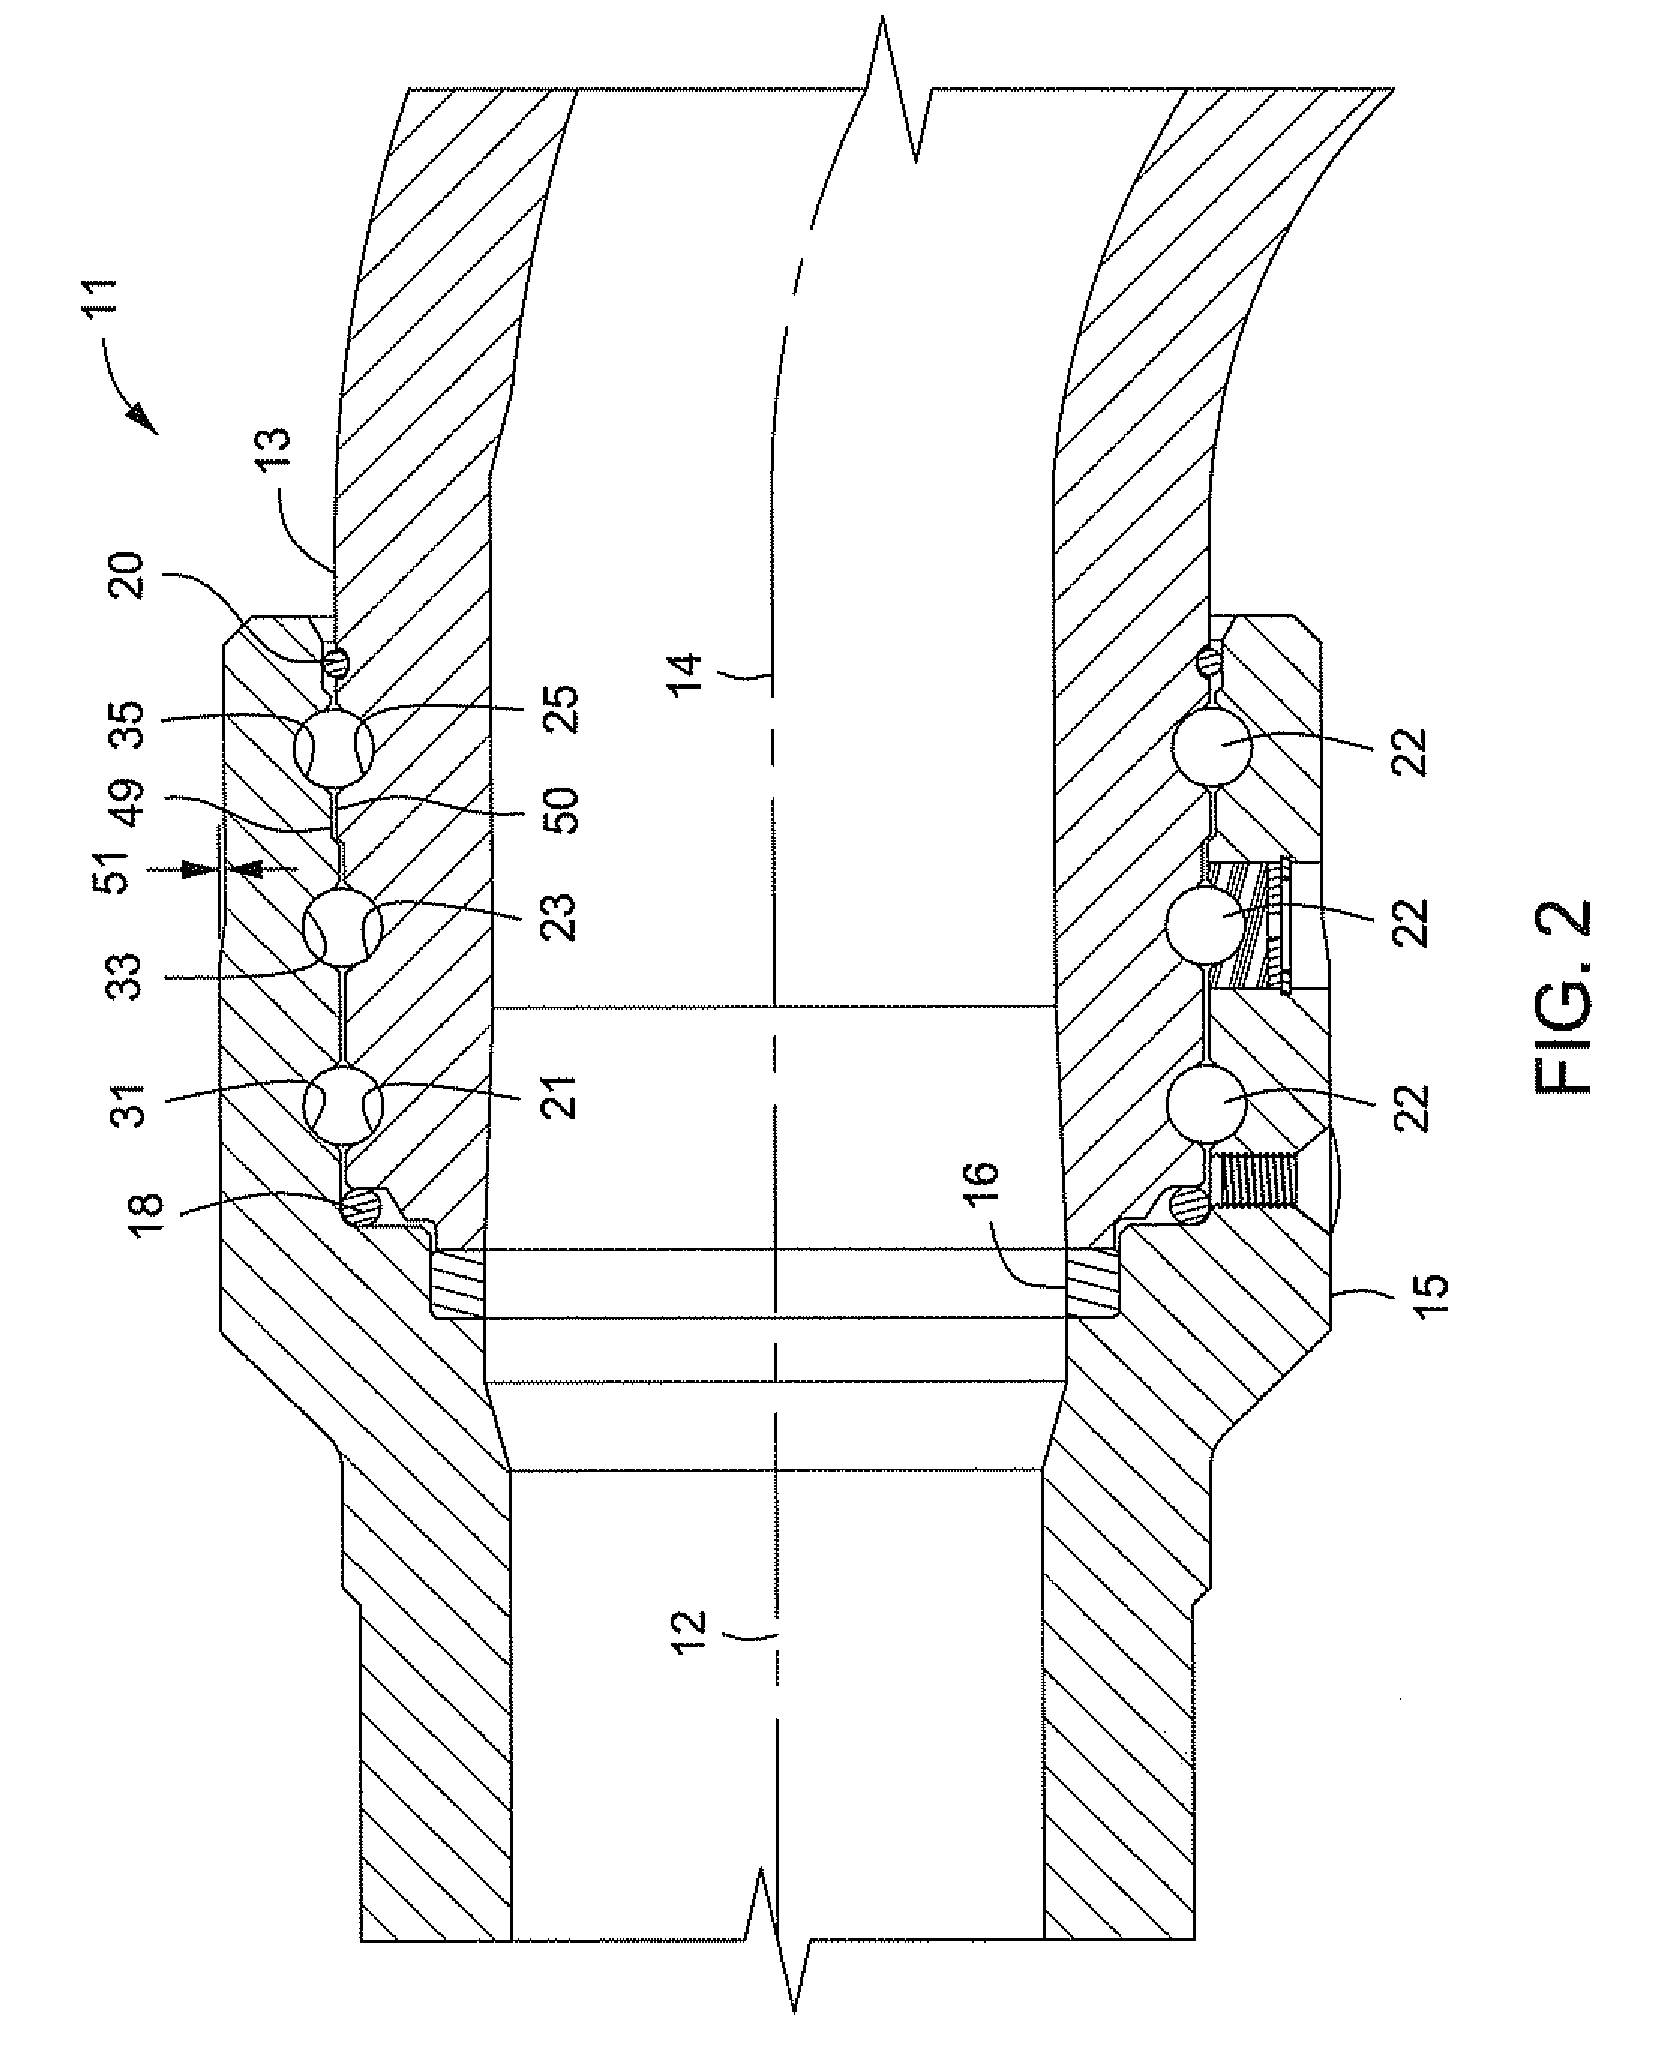 Swivel joint with uniform ball bearing requirements